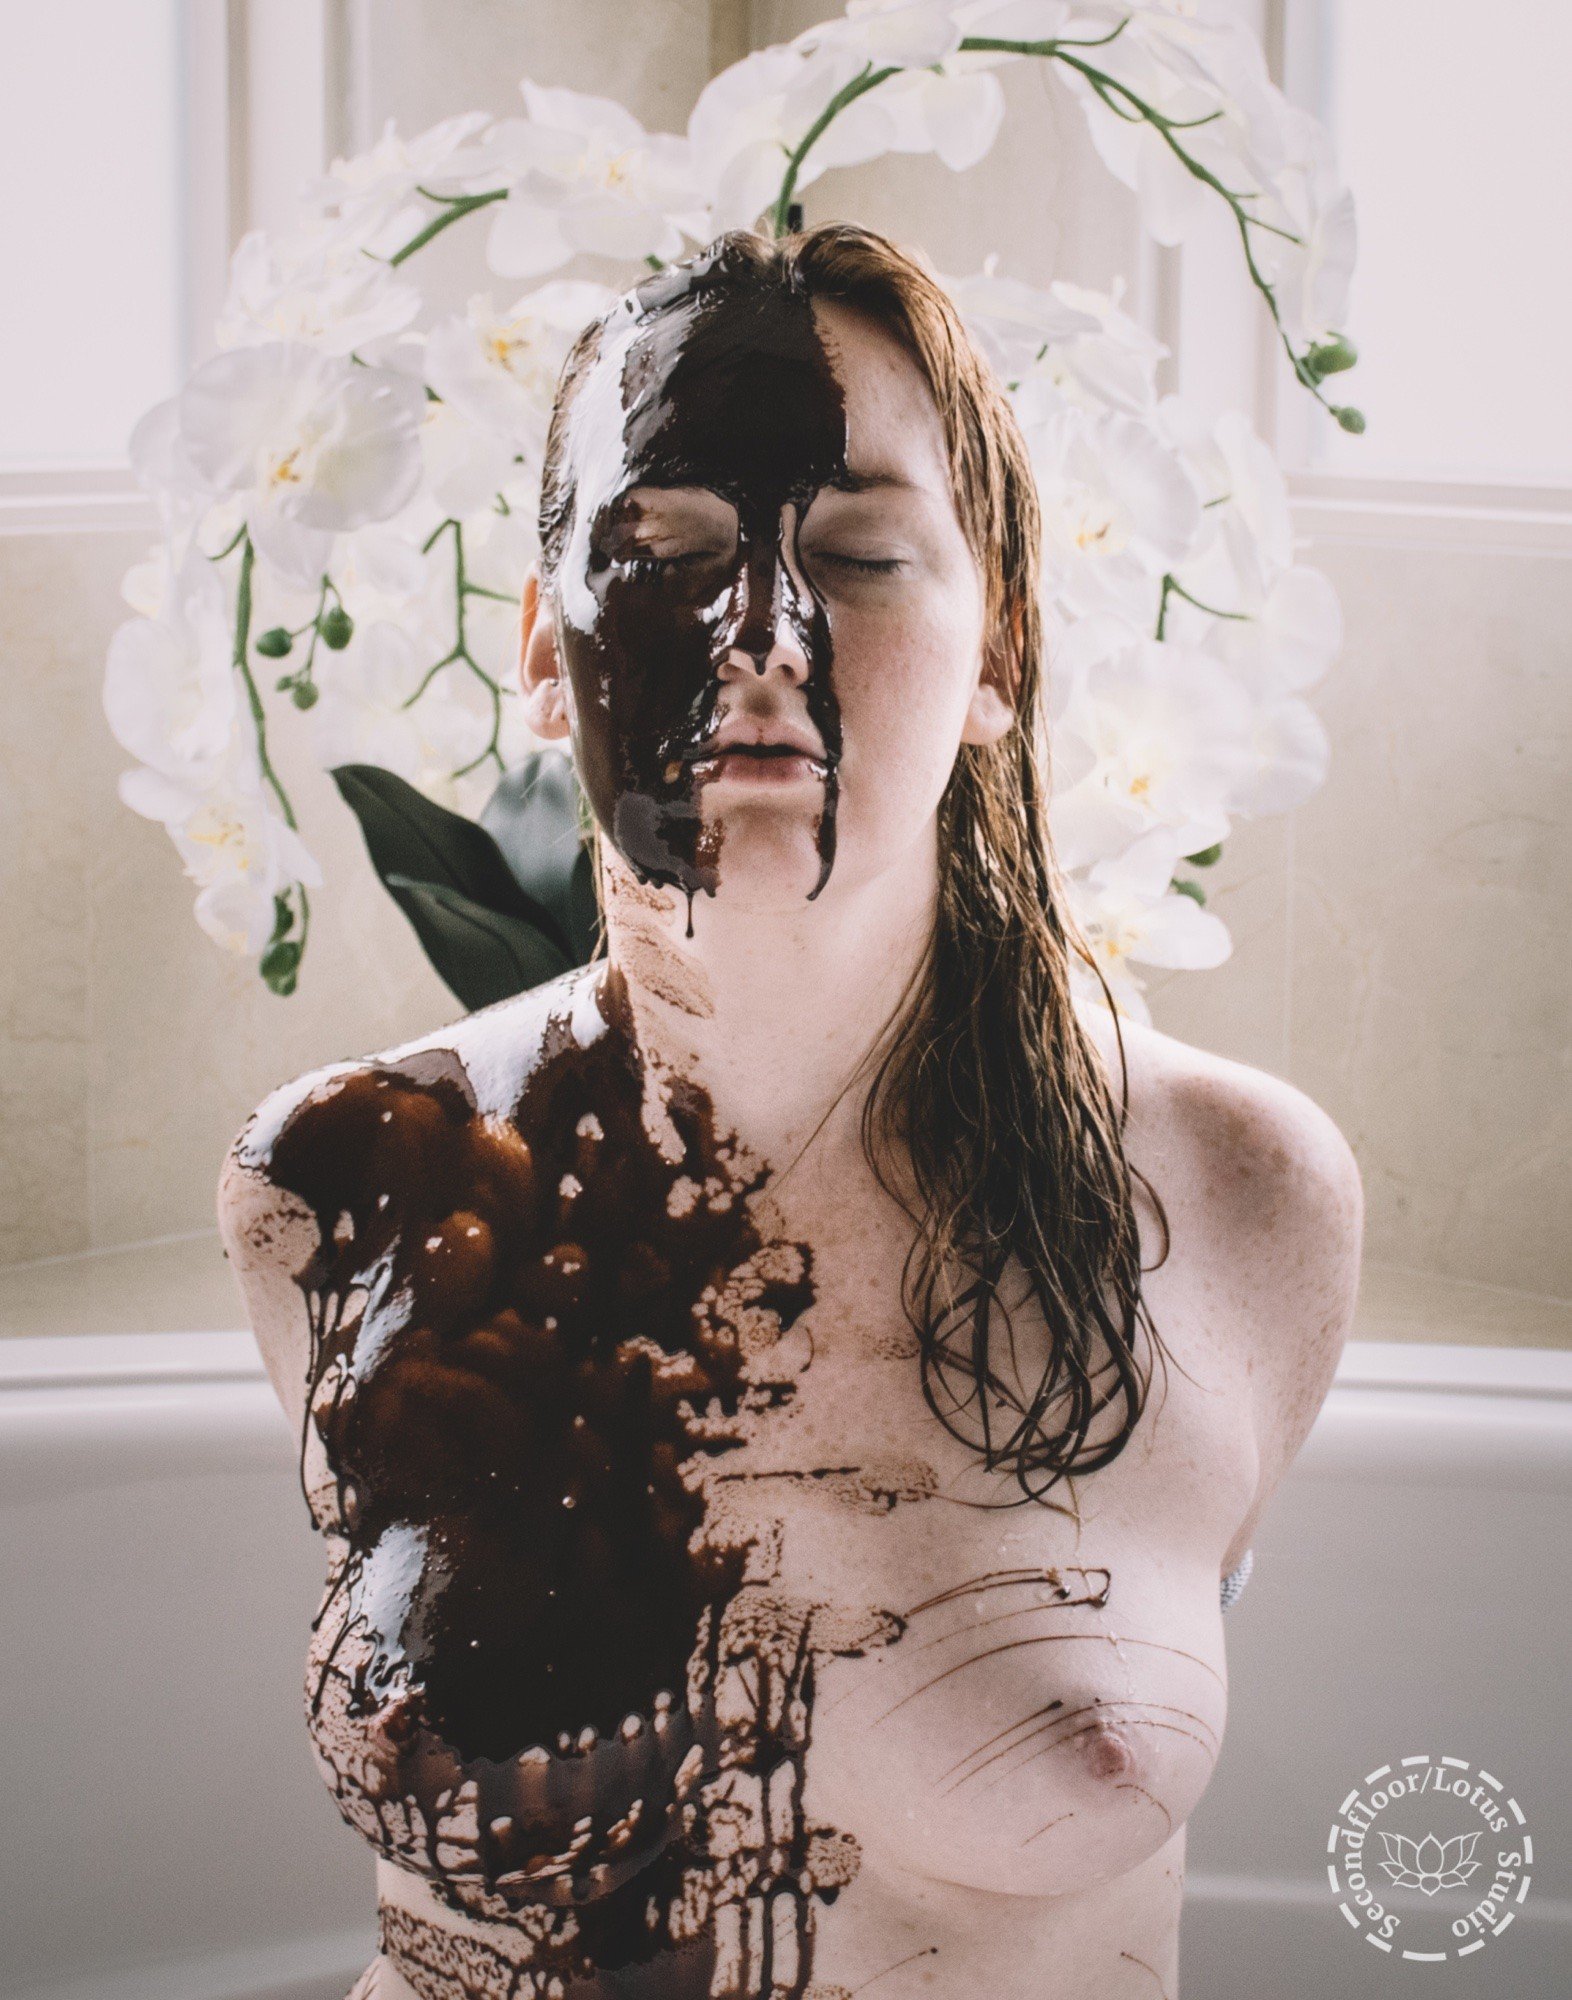 Photo by KinkyLotus with the username @KinkyLotus, who is a star user,  December 6, 2018 at 12:12 AM. The post is about the topic Sploshing and the text says 'KinkyLotus covered in Hershey’s chocolate syrup
In collaboration with Secondfloor and Traci Matlock
More on Kinkography:
https://kinkography.com'